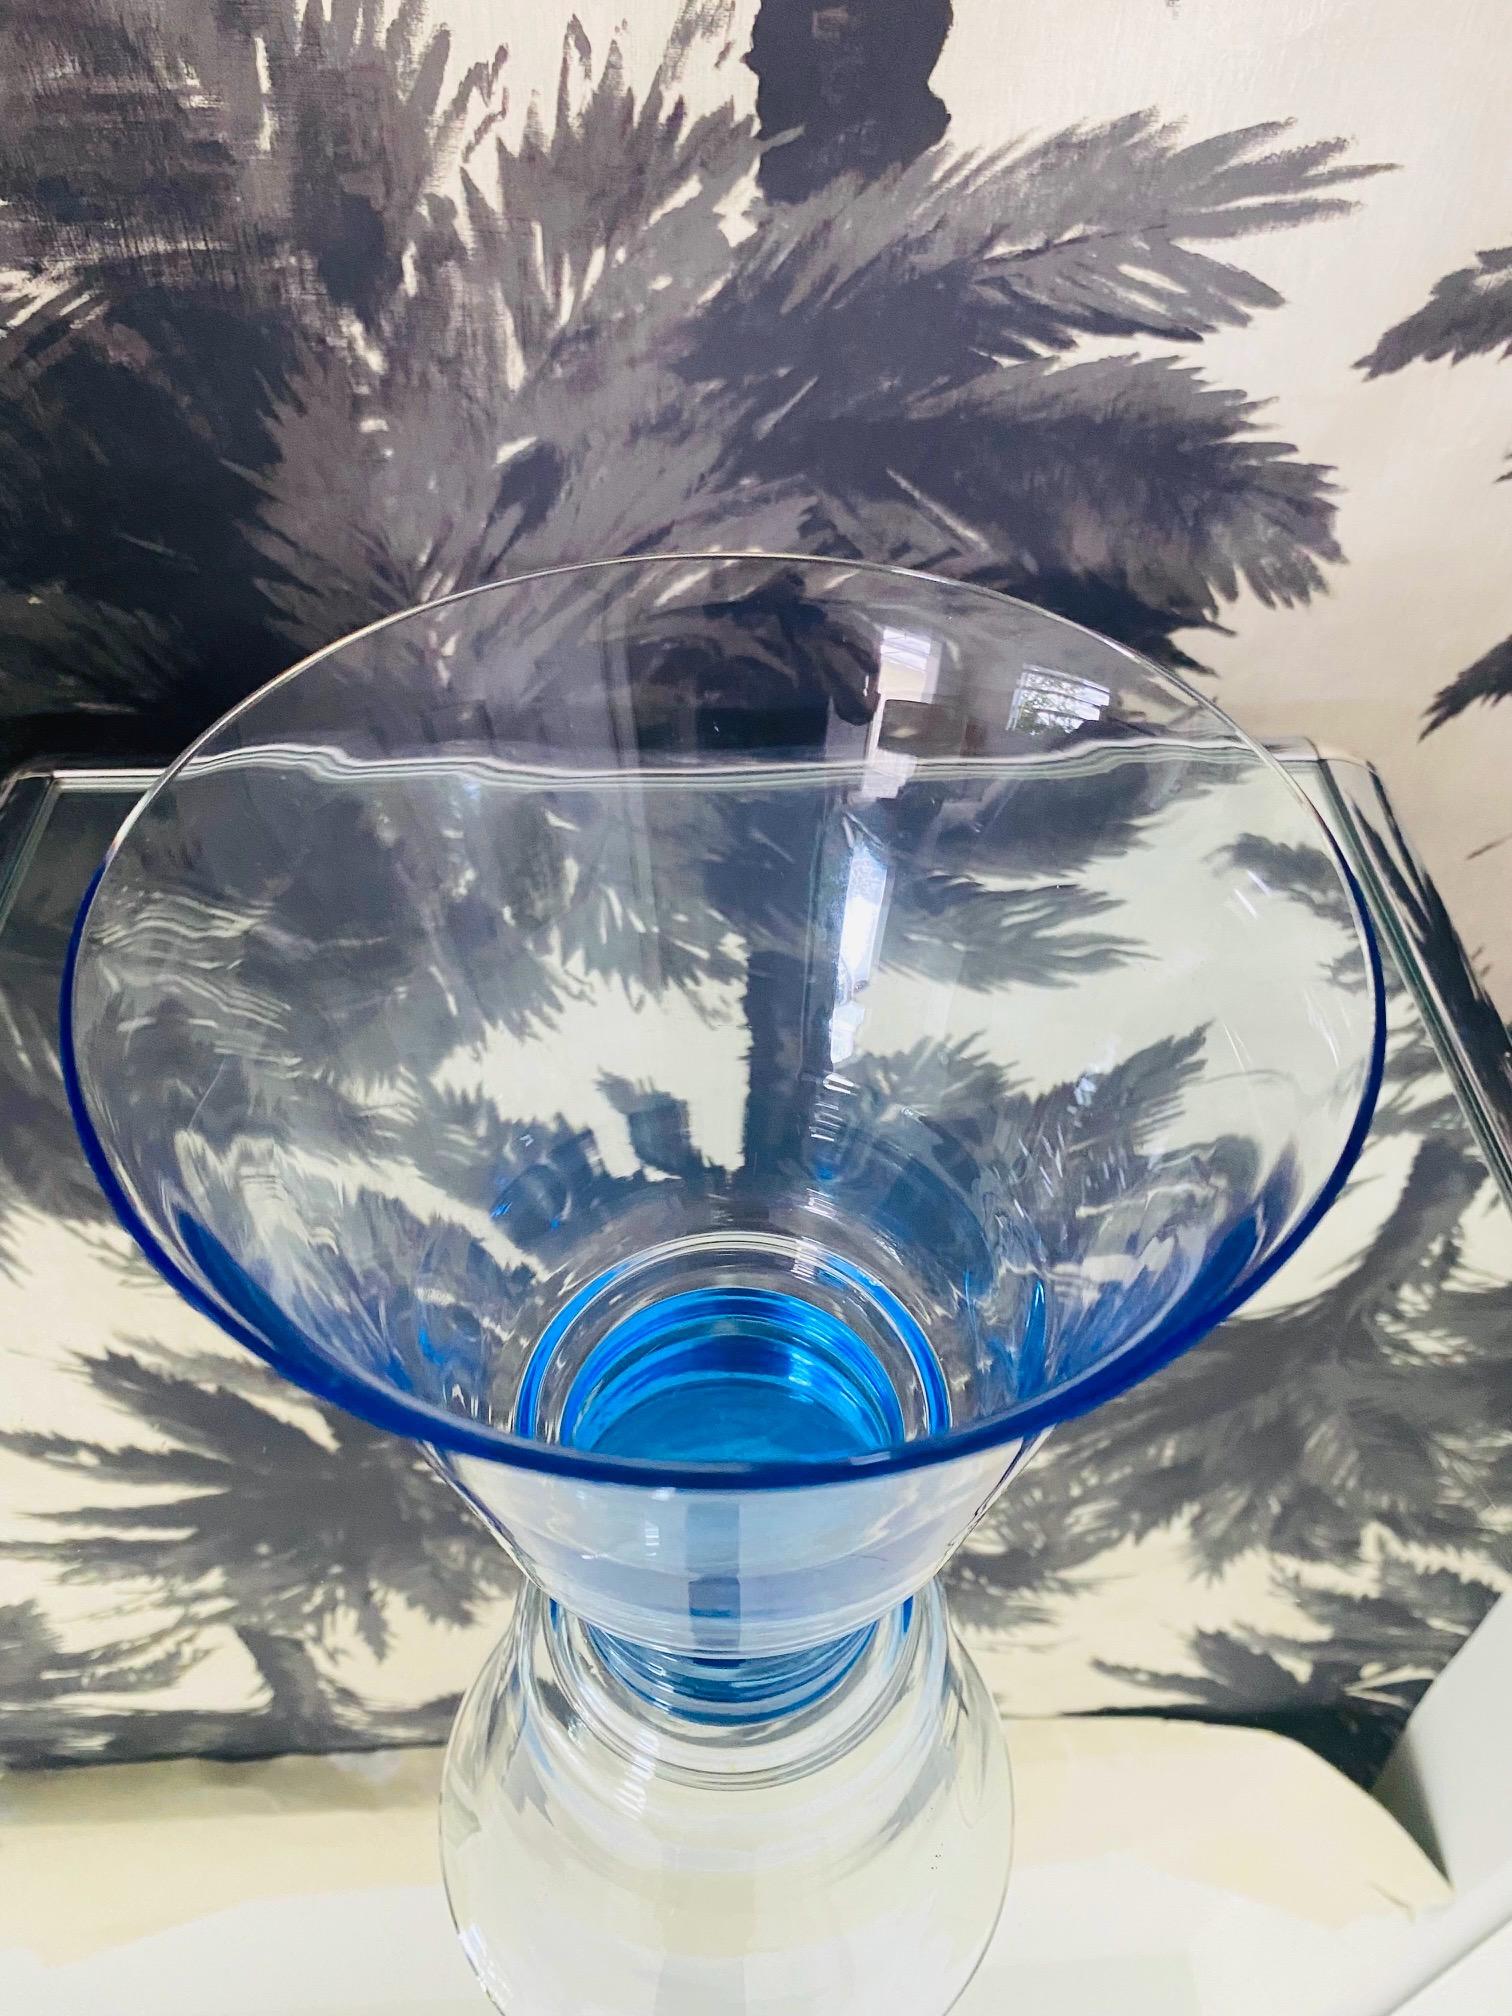 Mid-20th Century Art Deco Crystal Vase in Electric Blue, Czech Republic, c. 1940s For Sale